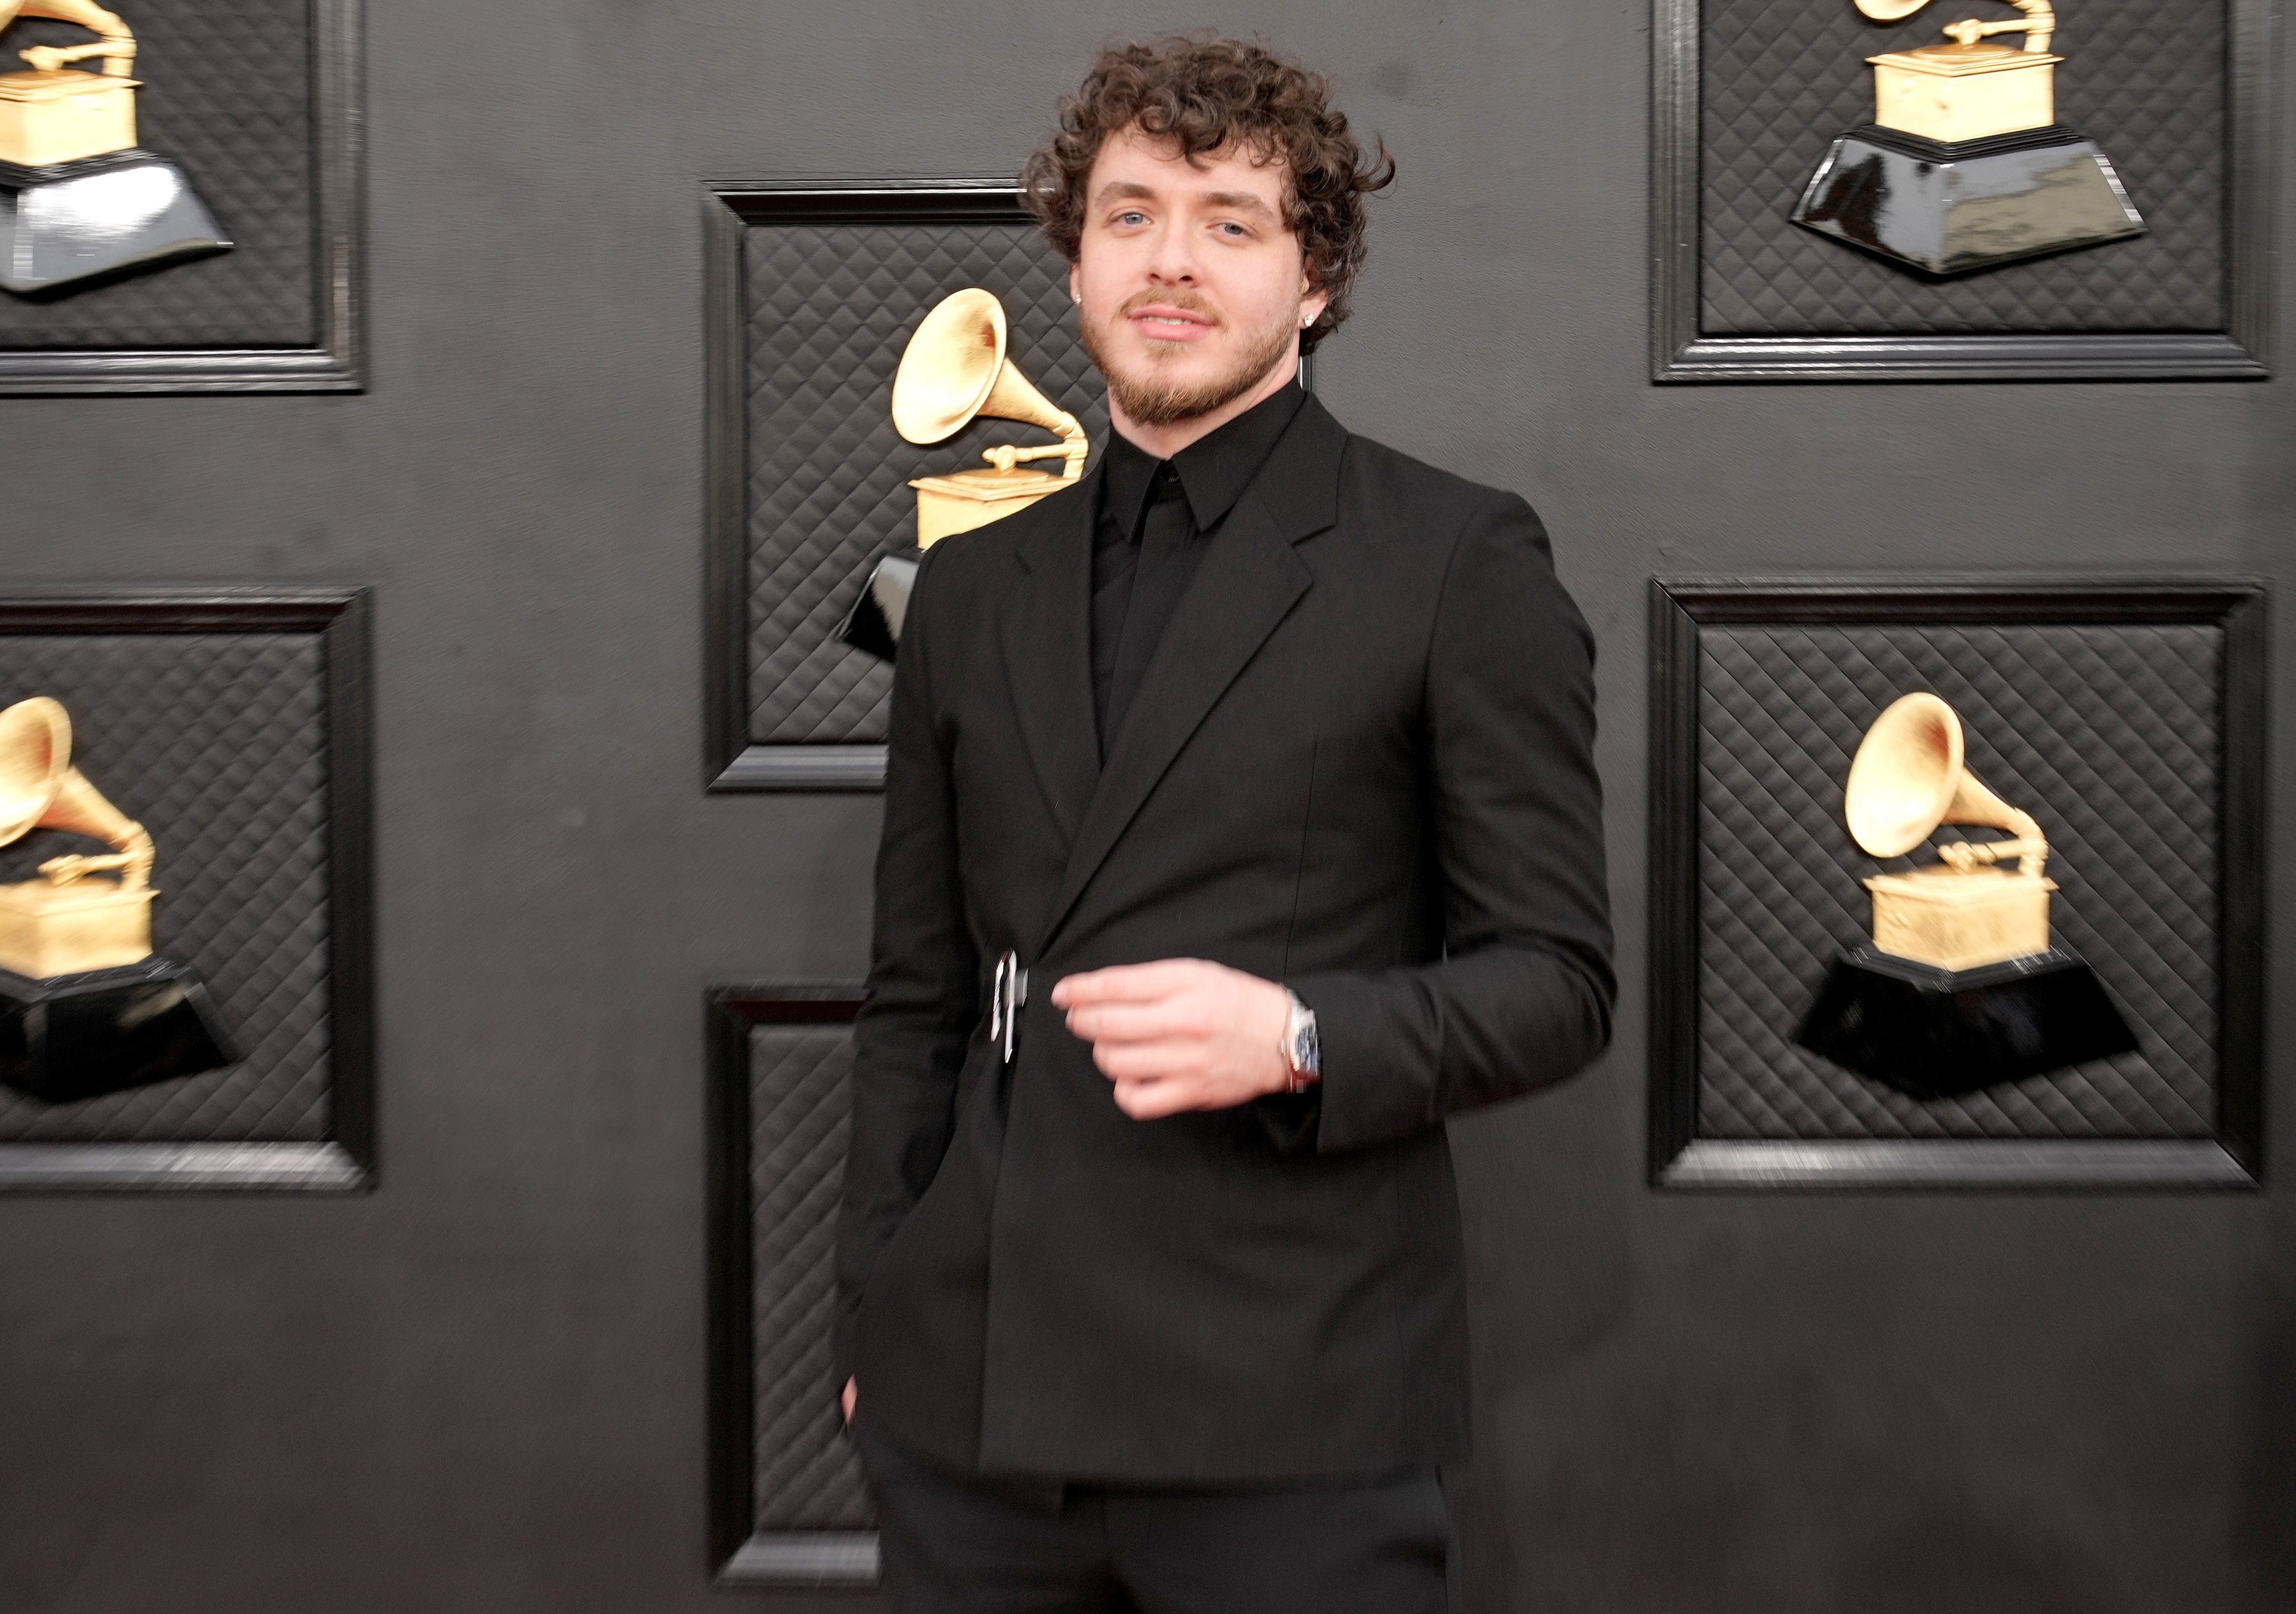 Jack Harlow doesn't let the hate bring him down. Here his posing at the 64th Annual Grammy Awards.